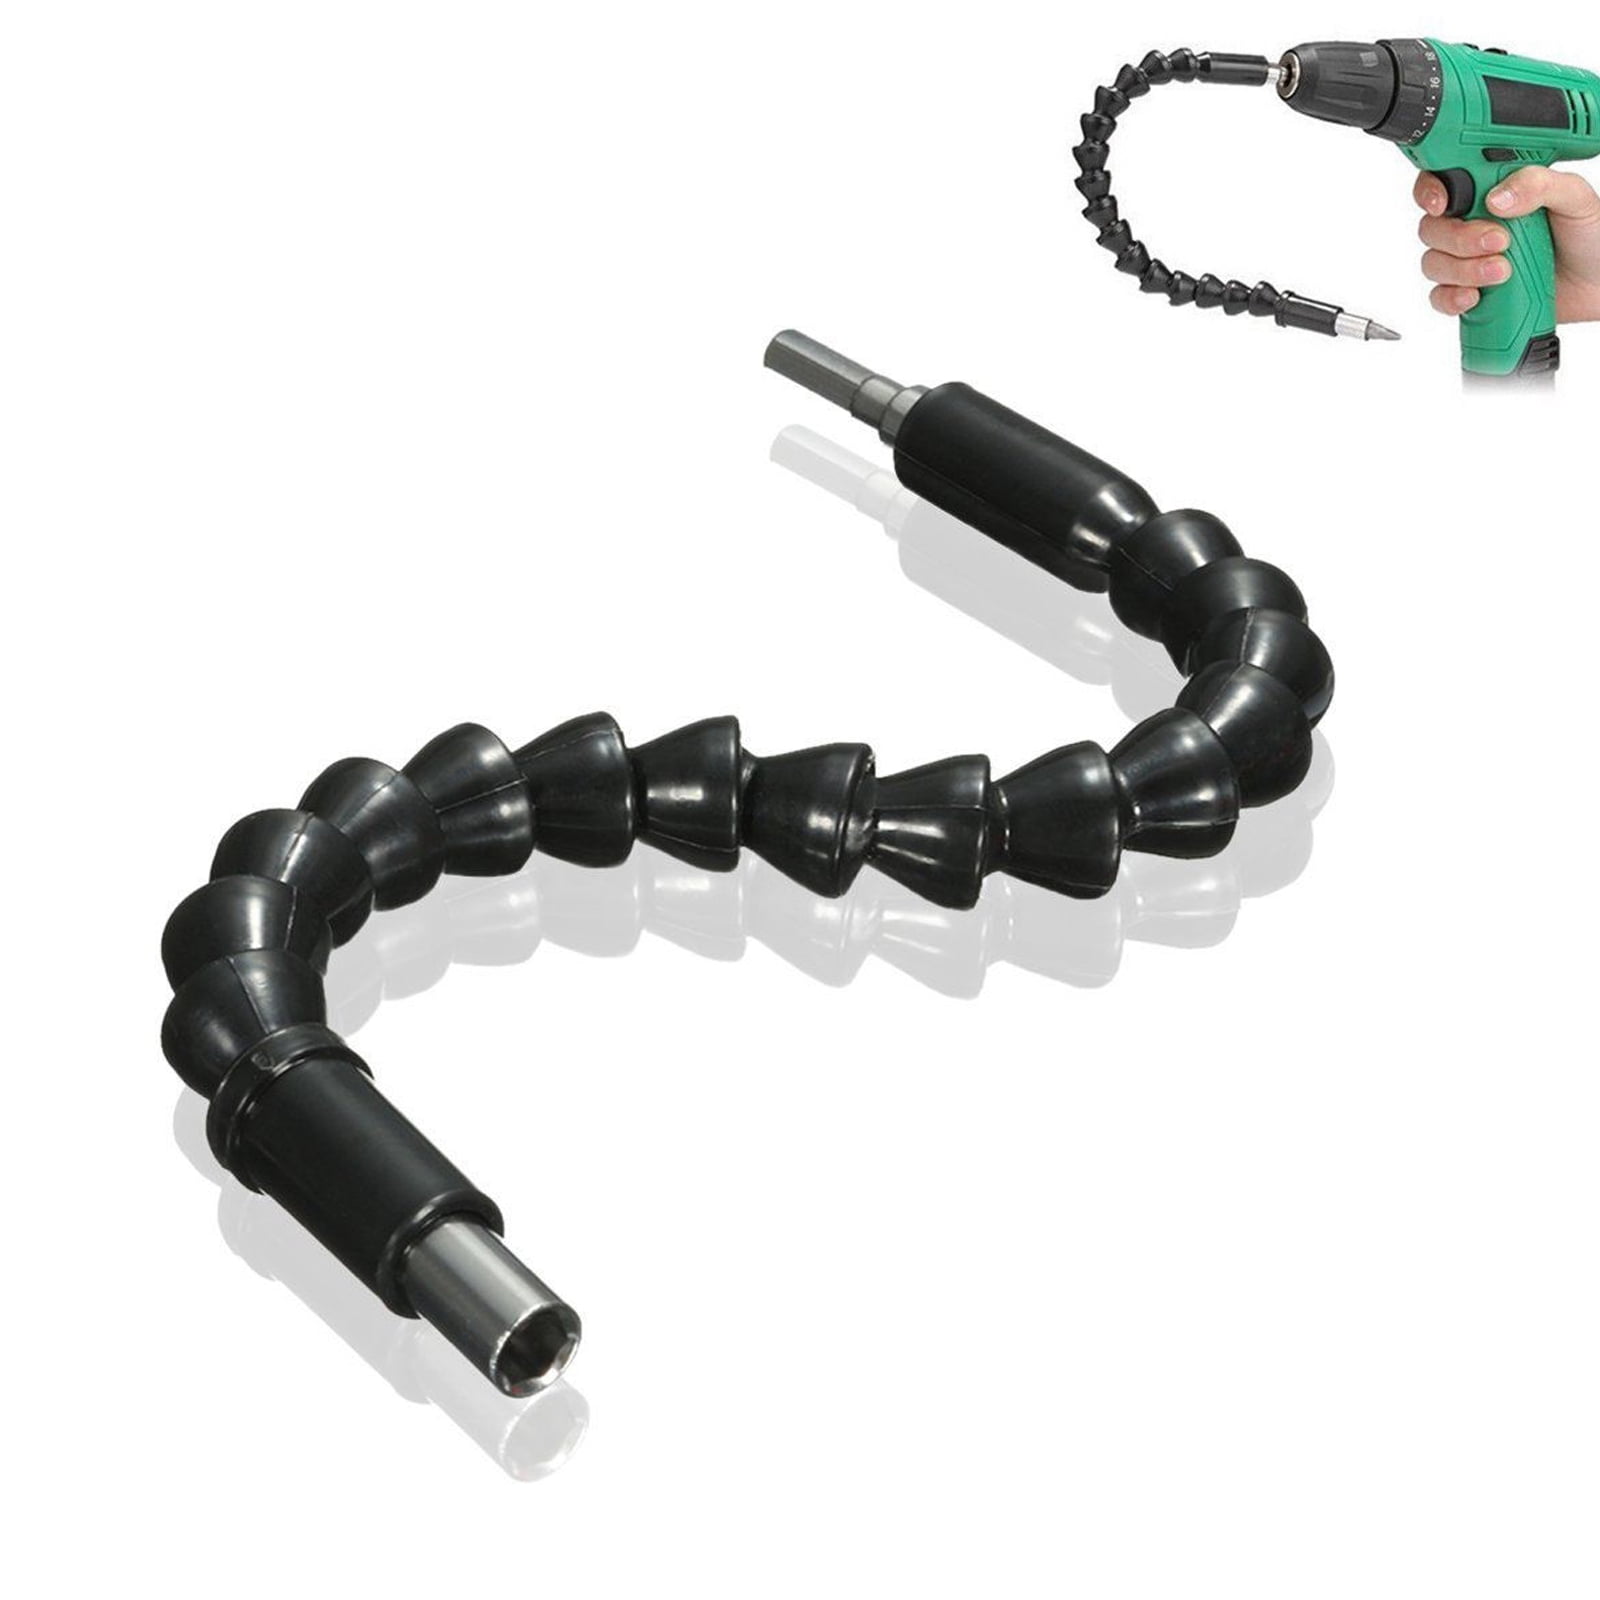 Flexible Shaft Magnetic Steel Wrench Tool Electronics Drill Screwdriver Bit Holder Connect Snake Flexible Hose Cardan Shaft Connection Soft Extension Rod Link